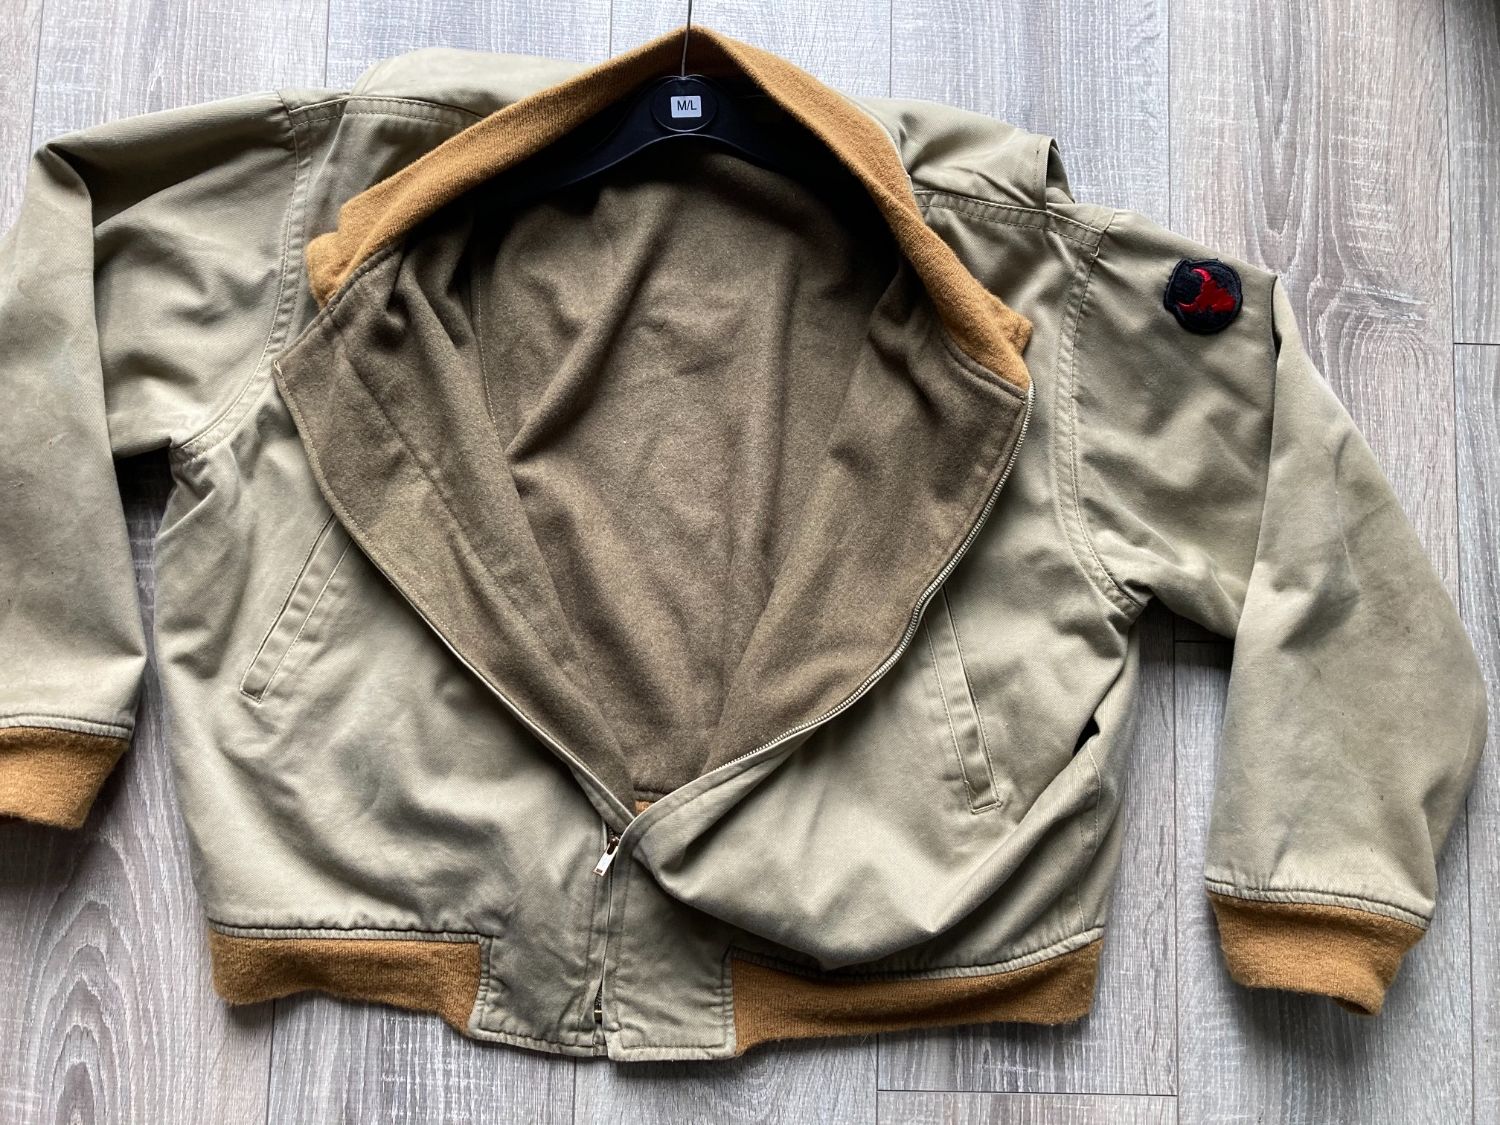 American Tanker Jacket for sale Medium - Gear - Airsoft Forums UK